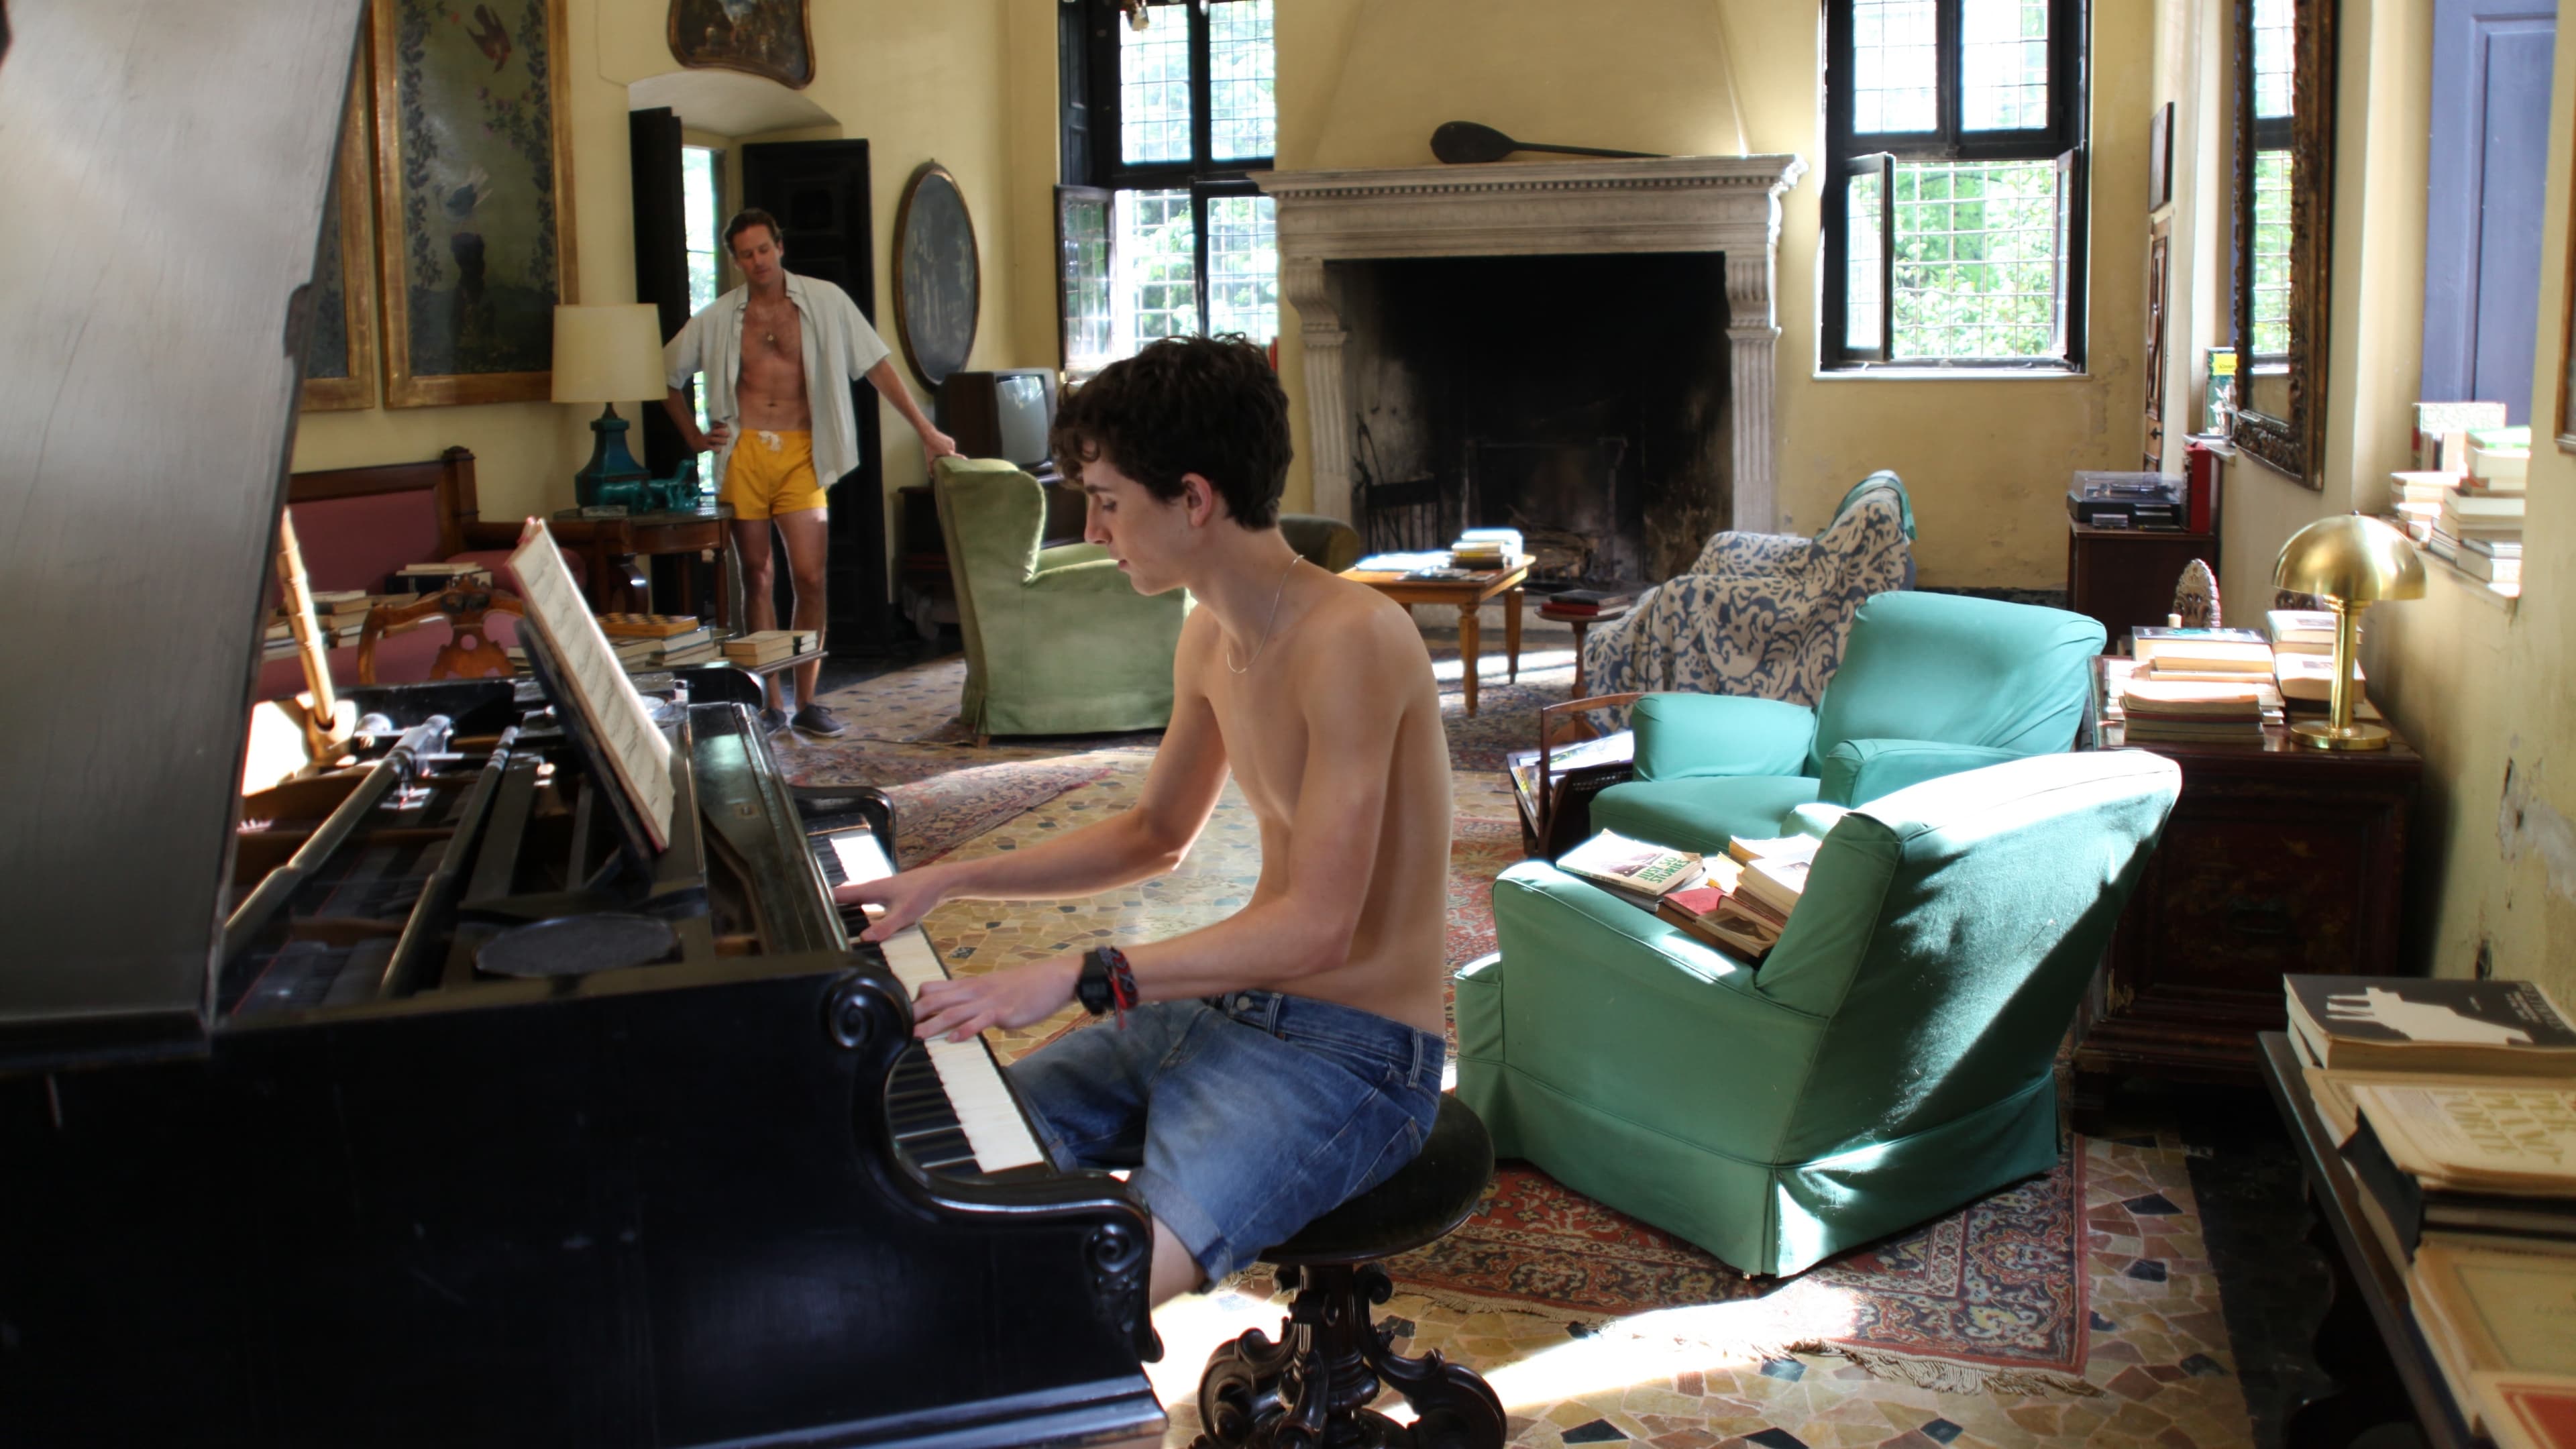 Image du film Call Me by Your Name d8afurzzoexzz74ta5himfp78pajpg